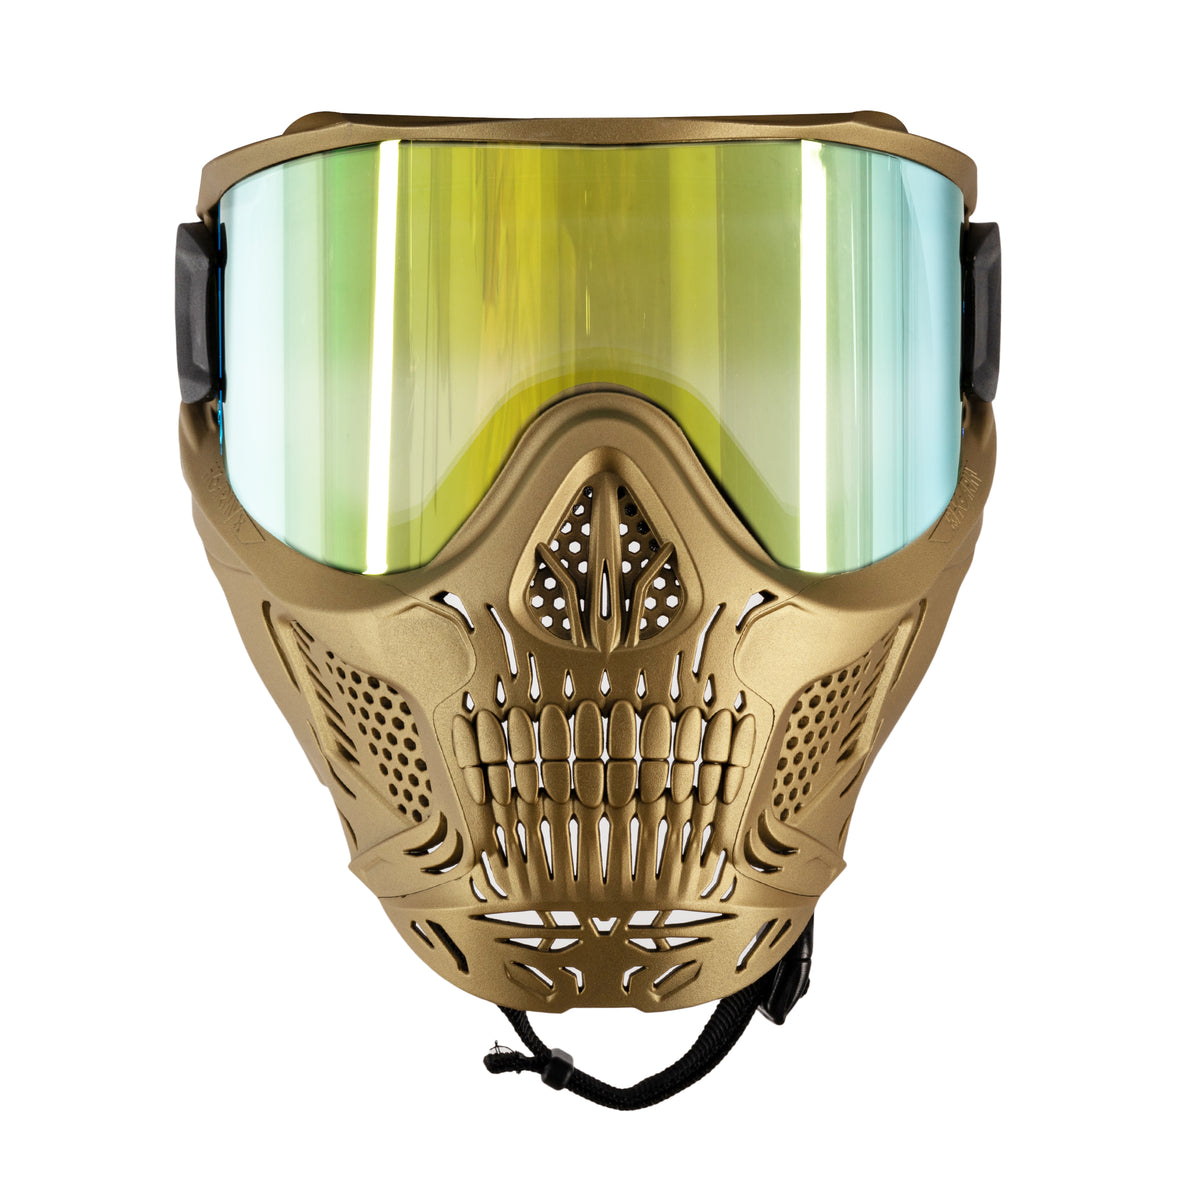 HSTL Skull Goggle "Metallic Gold" - W/ Gold Lens | Paintball Goggle | Mask | Hk Army